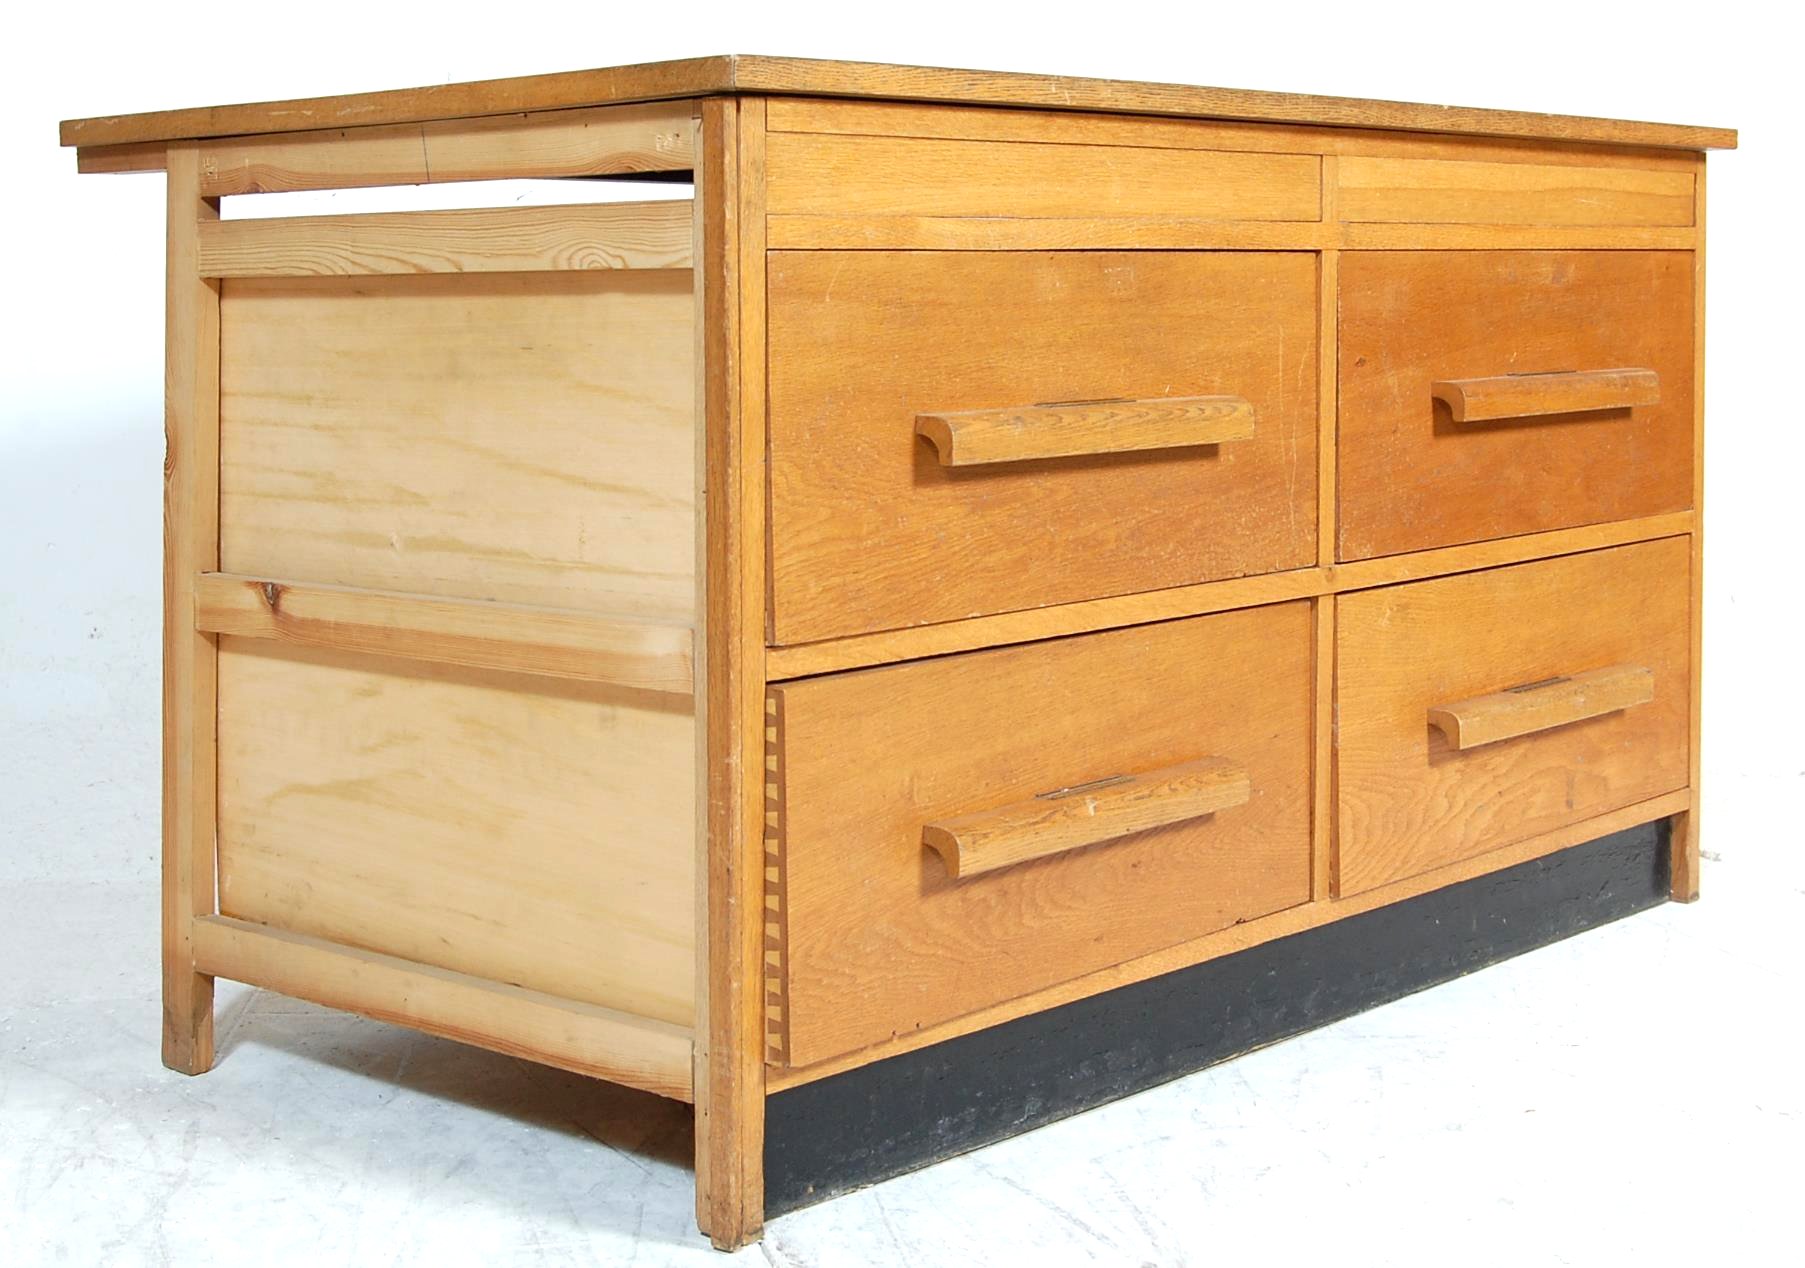 MID CENTURY GOLDEN OAK ARCHITECTS INDUSTRIAL PLAN CHEST - Image 5 of 5